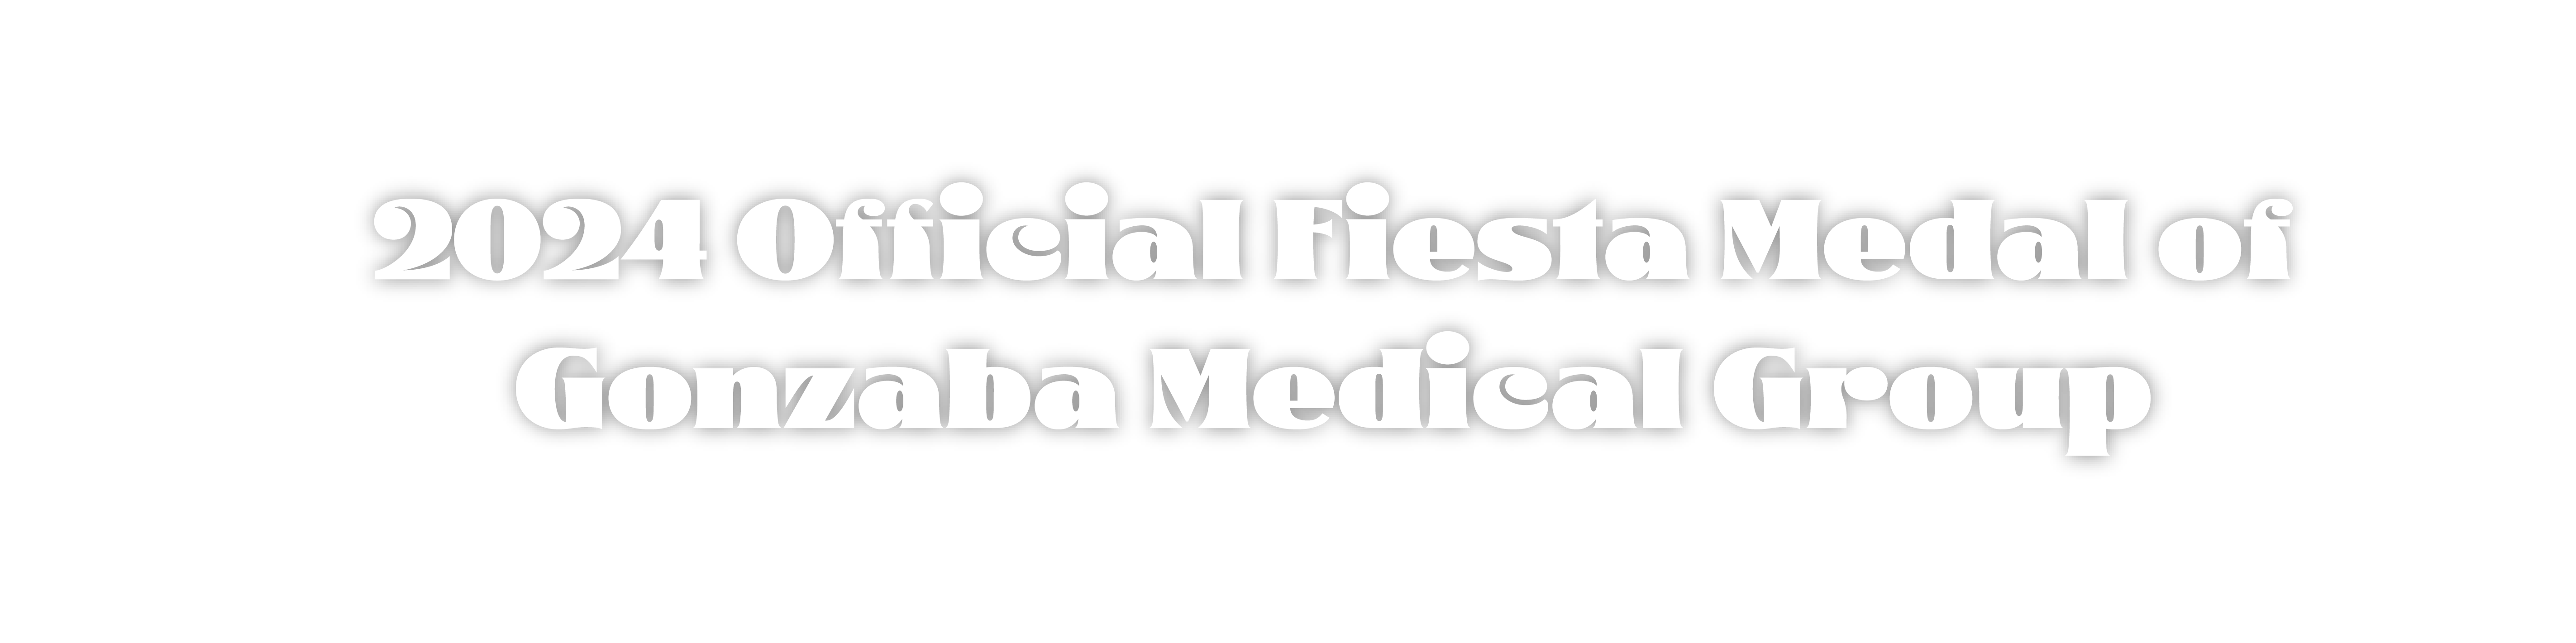 "2024 Official Fiesta Medal of Gonzaba Medical Group"